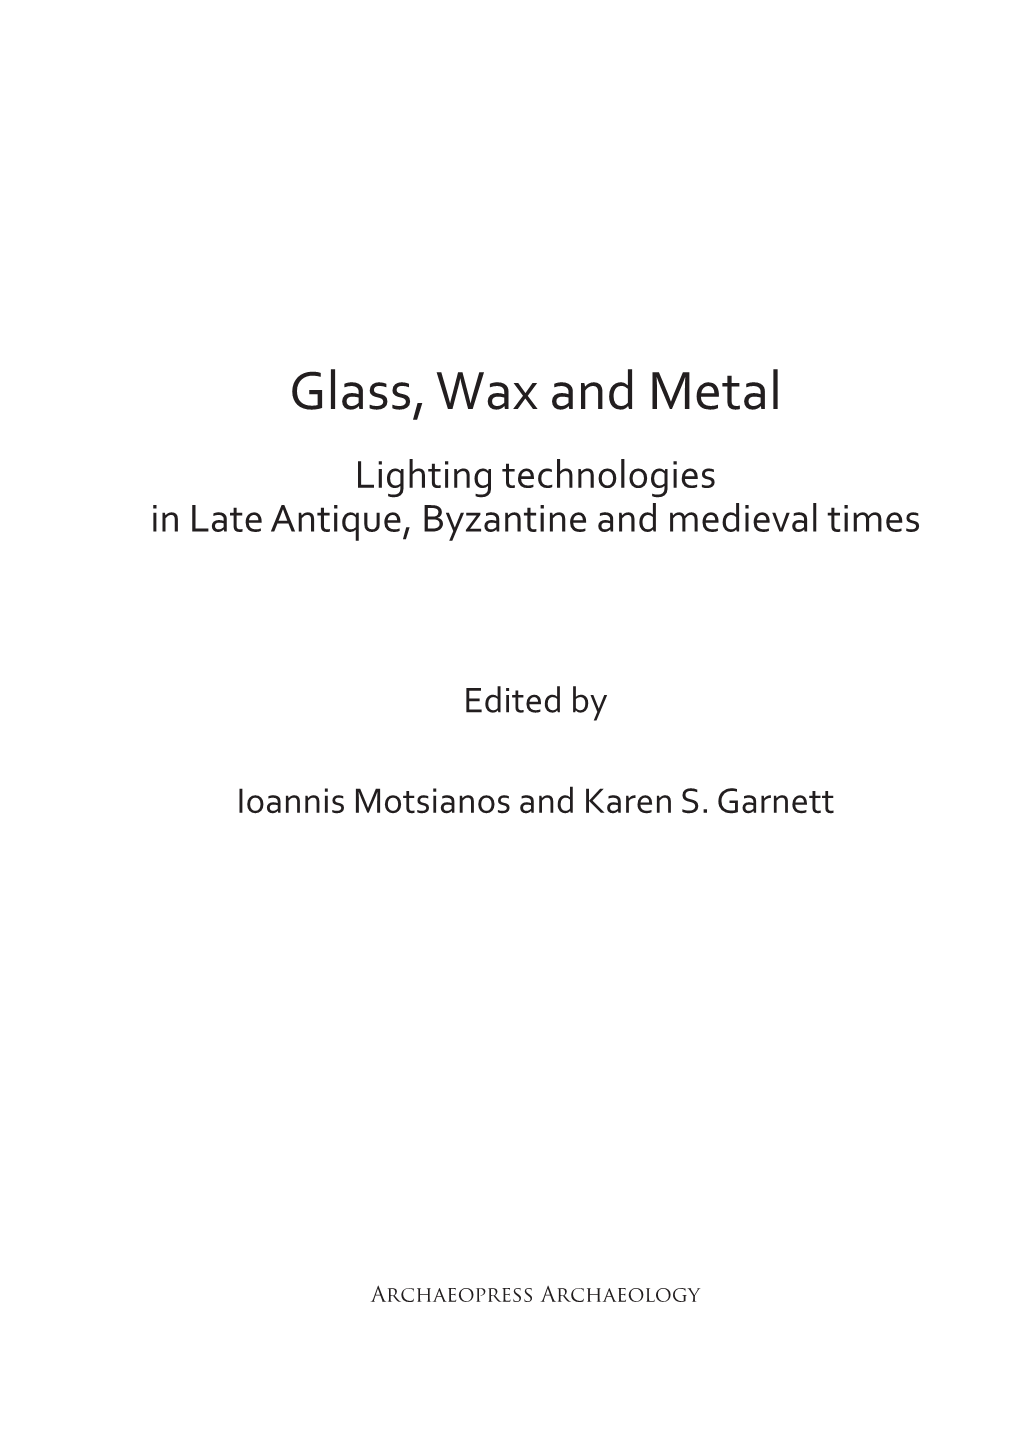 Glass, Wax and Metal: Lighting Technologies in Late Antique, Byzantine and Medieval Times: an Introduction ����������Iii Karen S